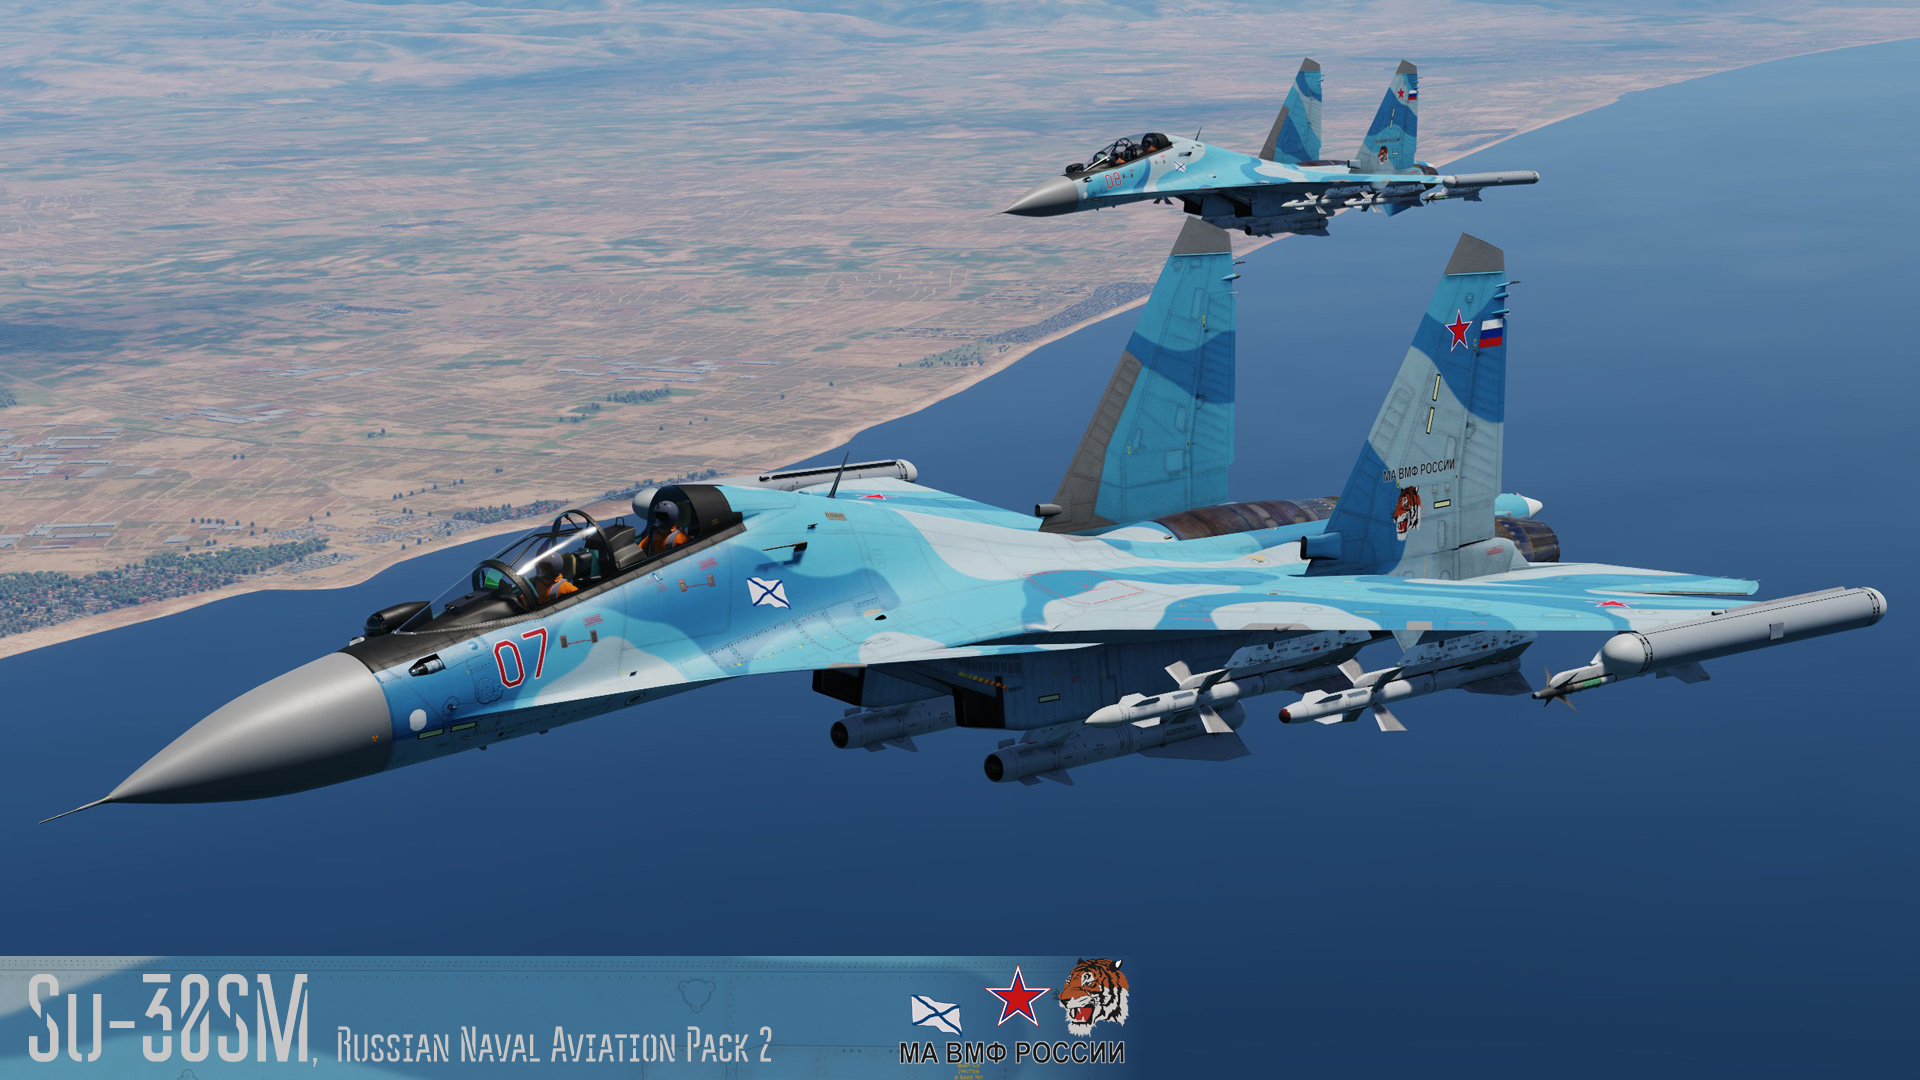 Russian Naval Aviation Pack 2